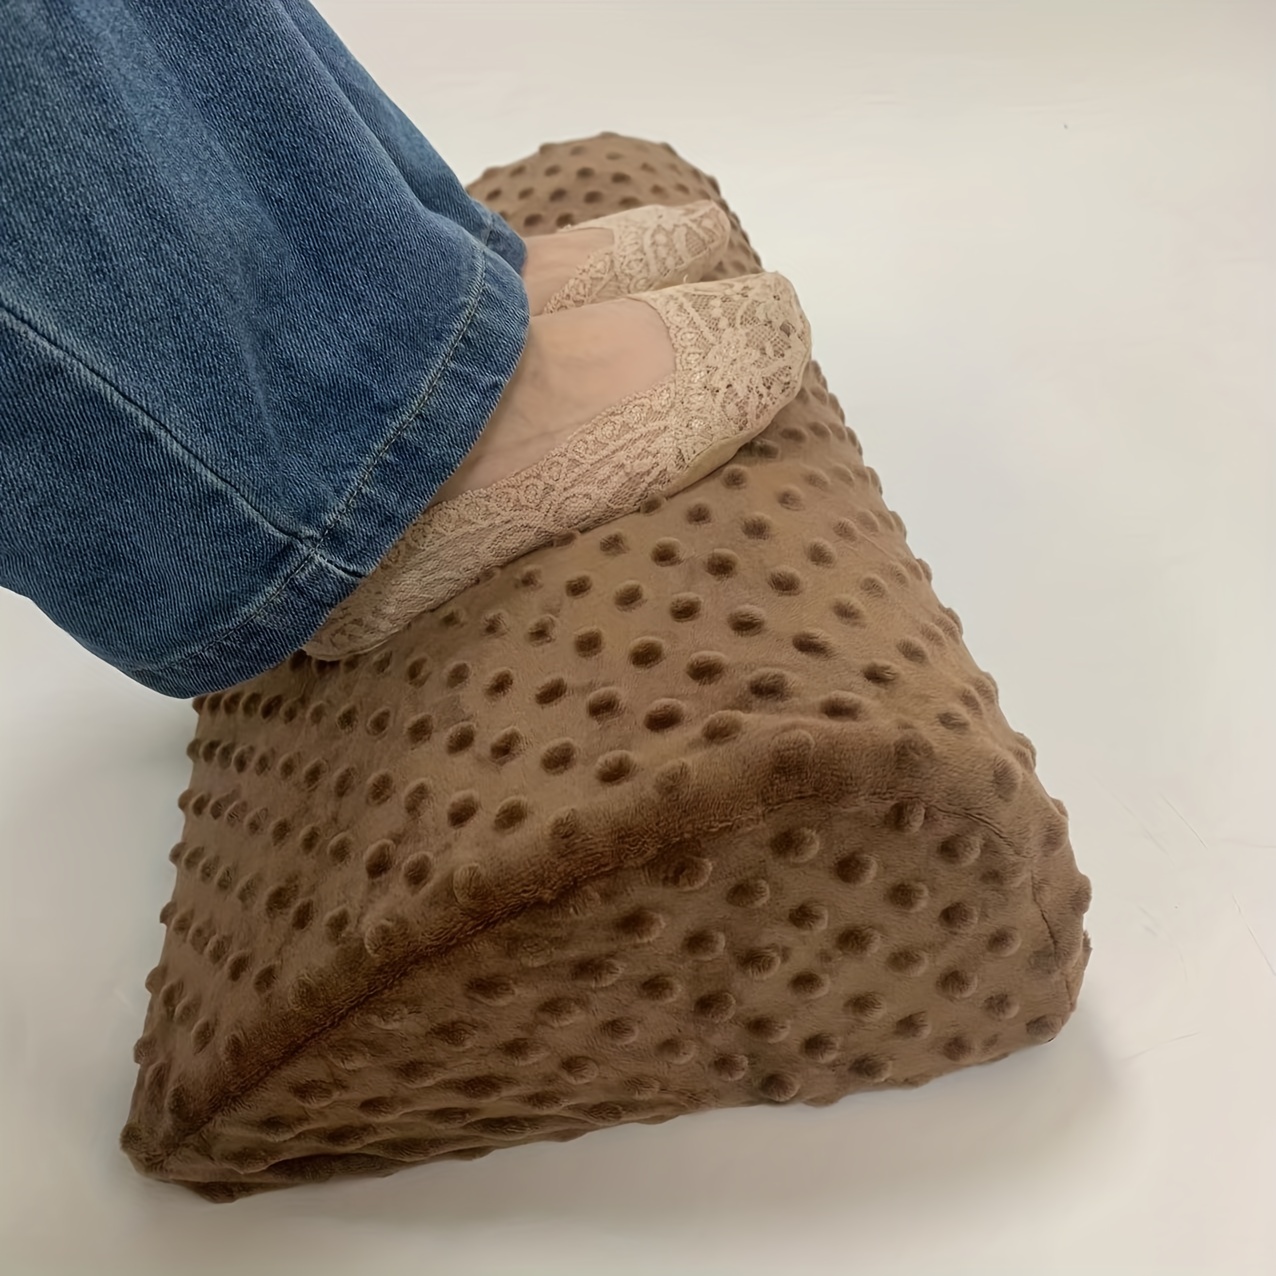 Foot Rest for Under Desk at Work, Ergonomic Foot Stool with 2